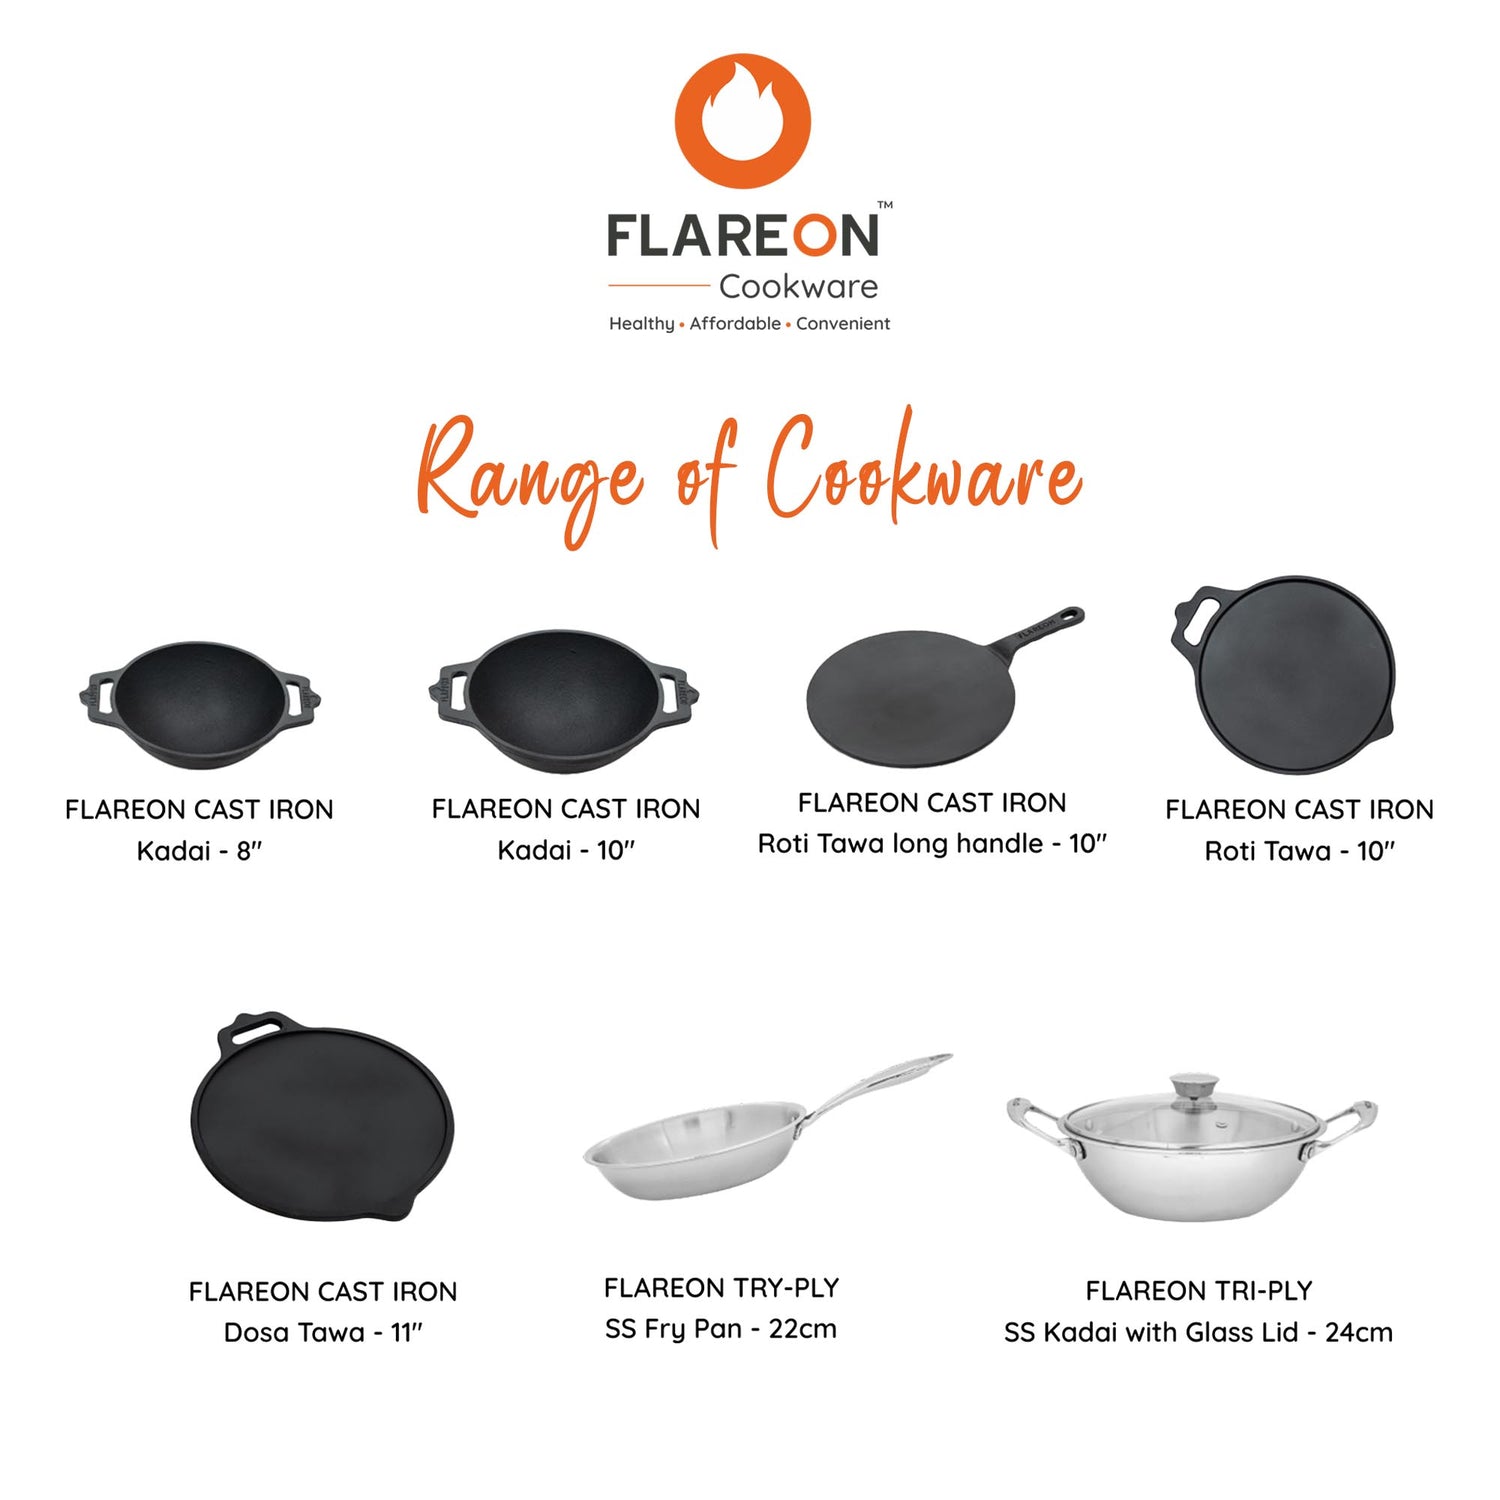 FlareOn's TriPly Stainless Steel Fry Pan 22 Cm- Range of Cookware